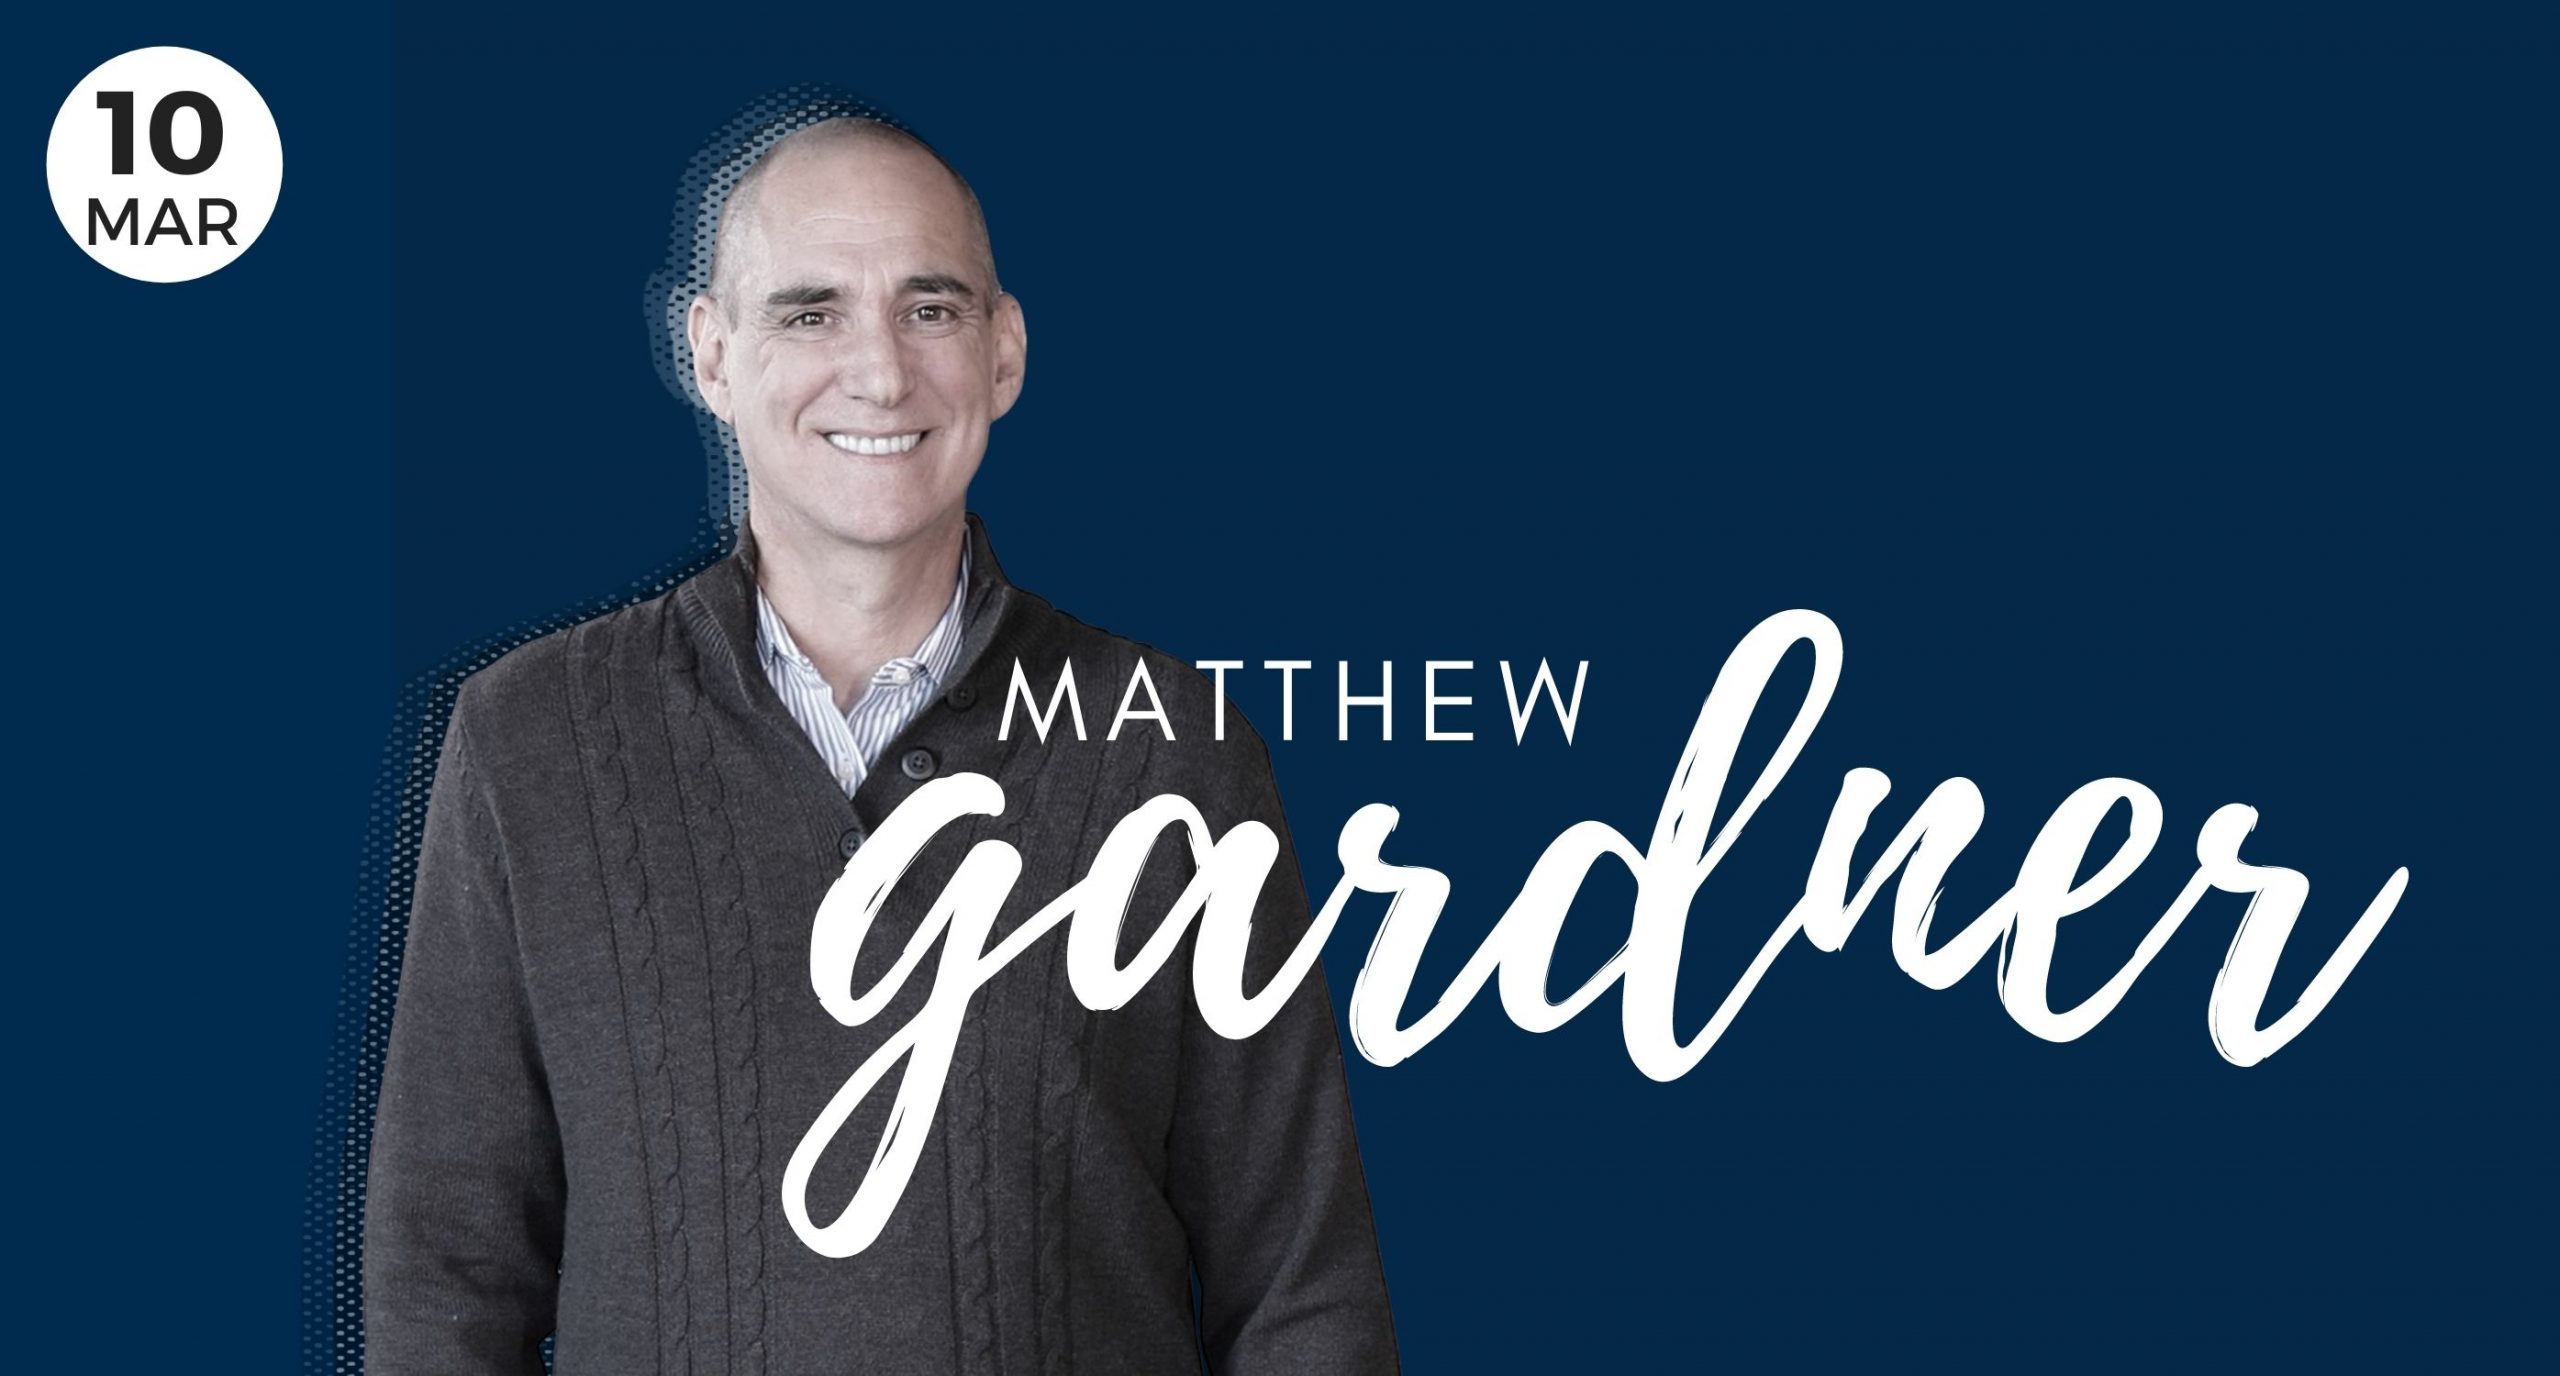 Matthew Gardner, Windermere, Real Estate, Whidbey Island, Homes, Homes for Sale, local event